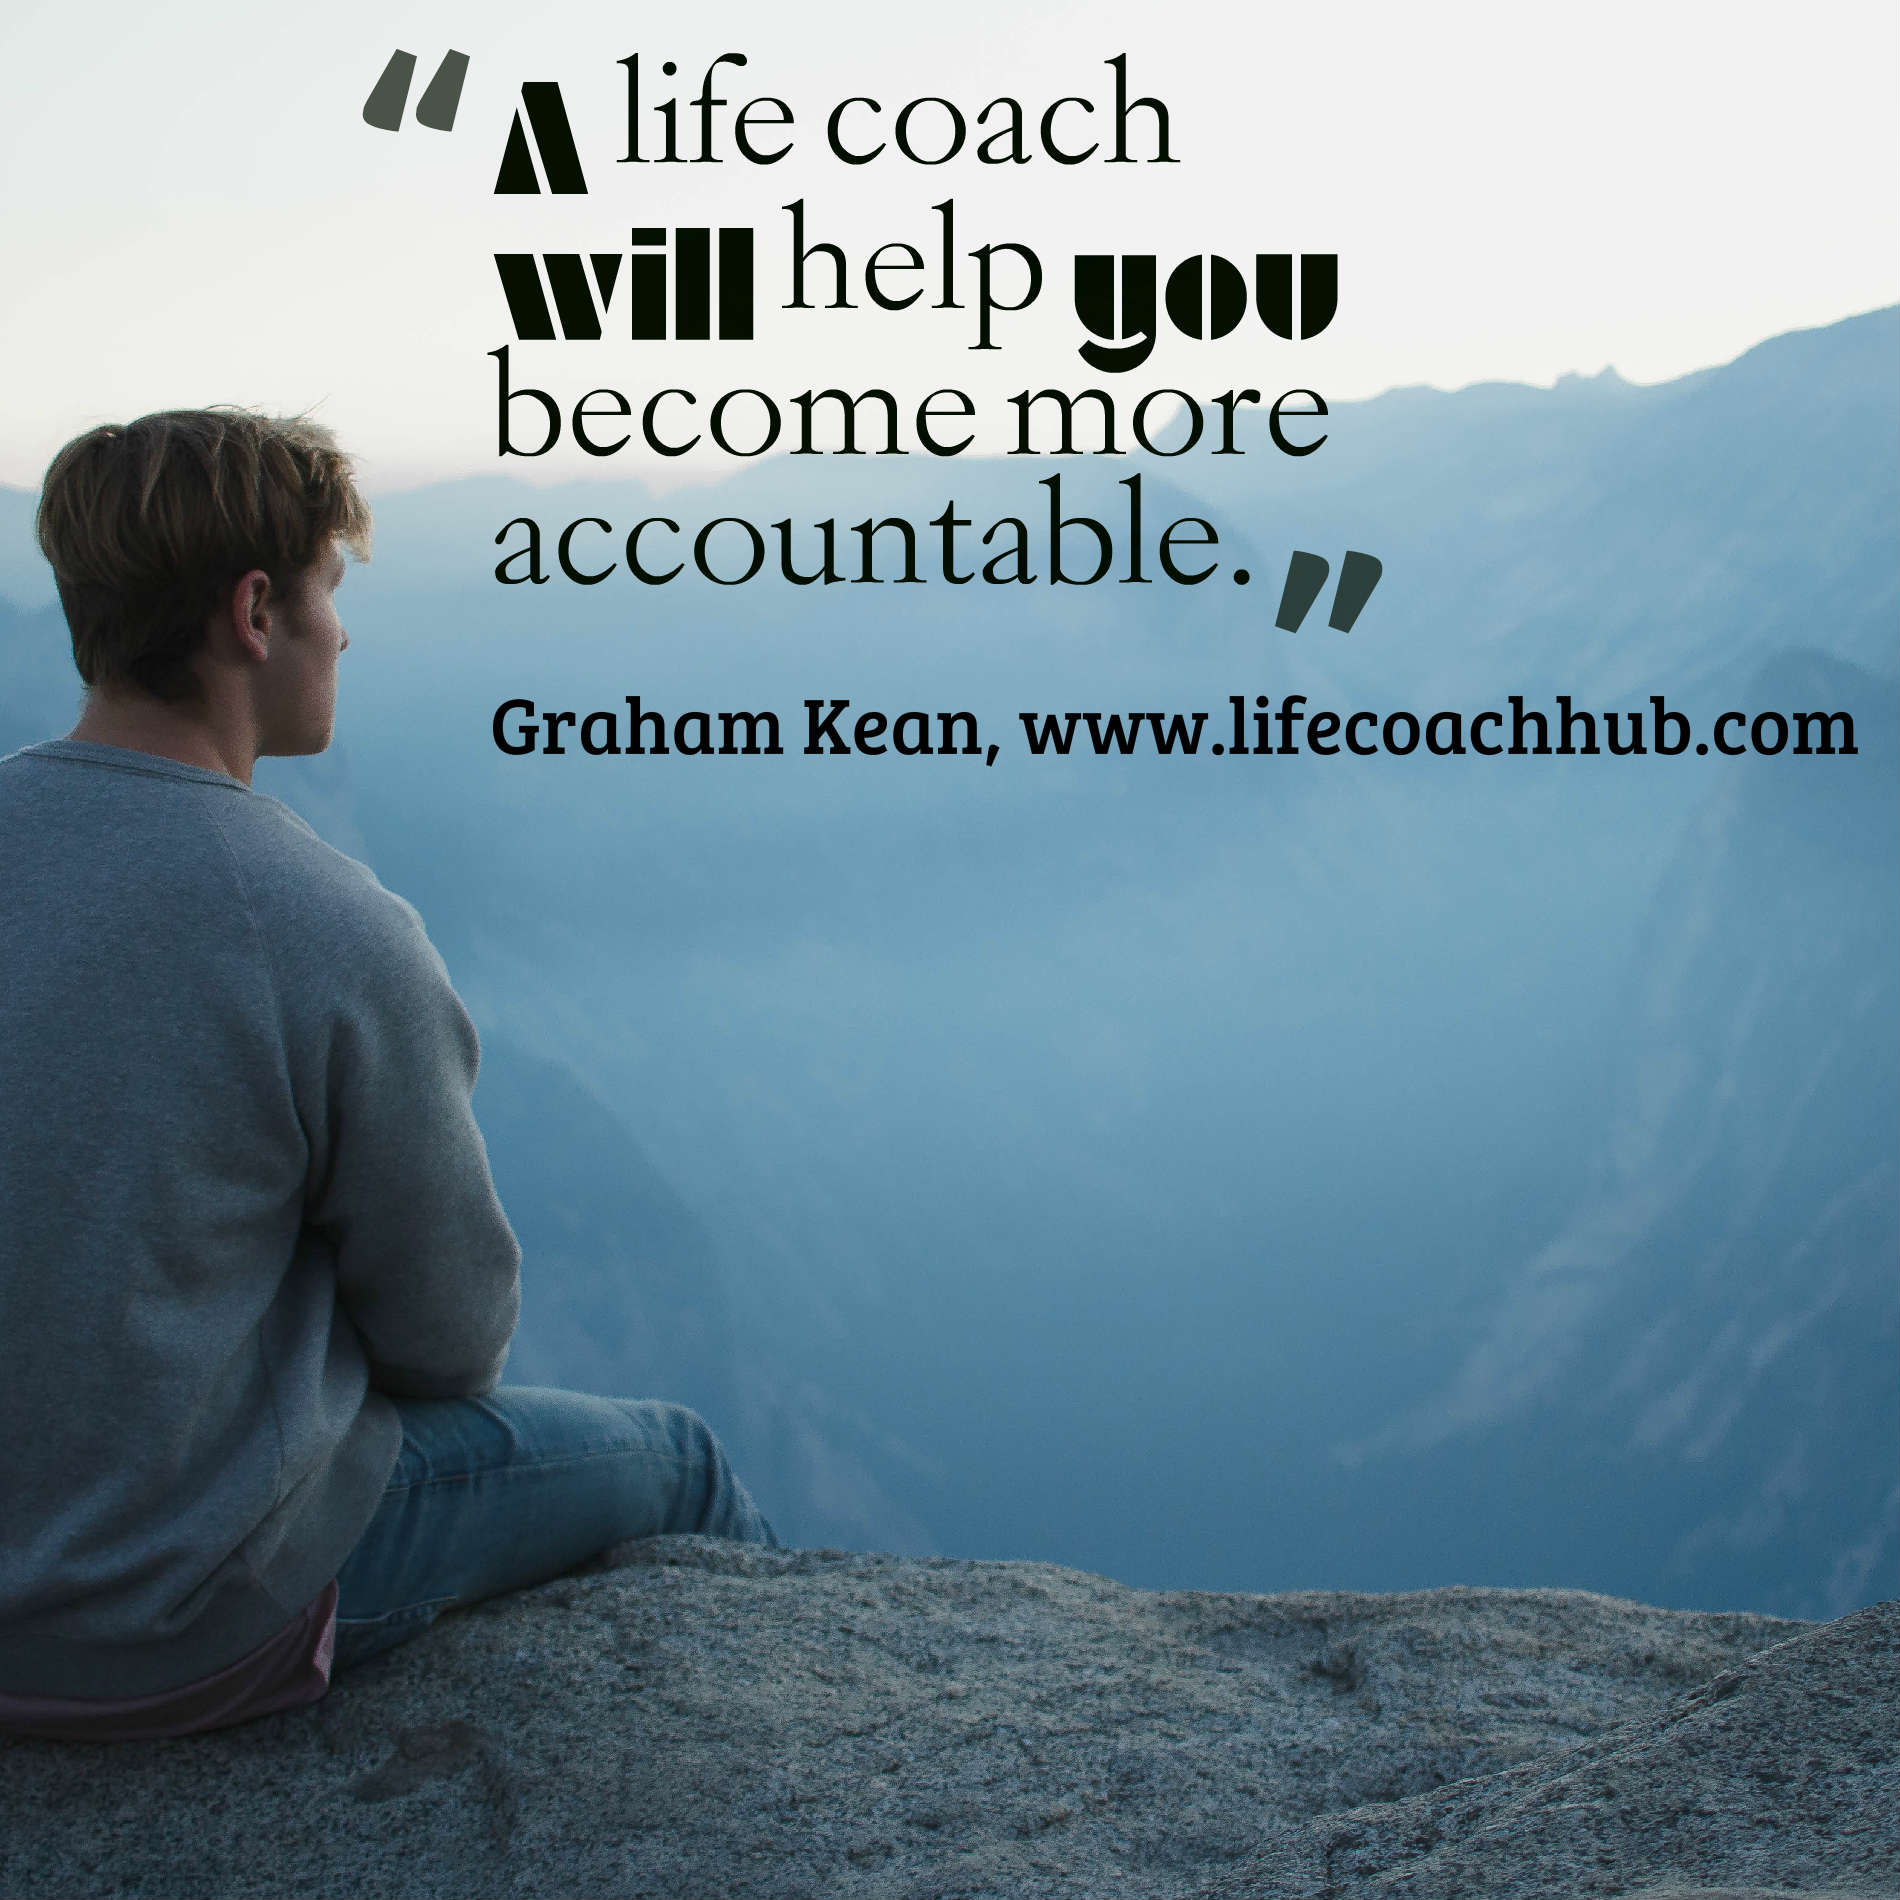 A Life Coach Will Help You Become More Accountable